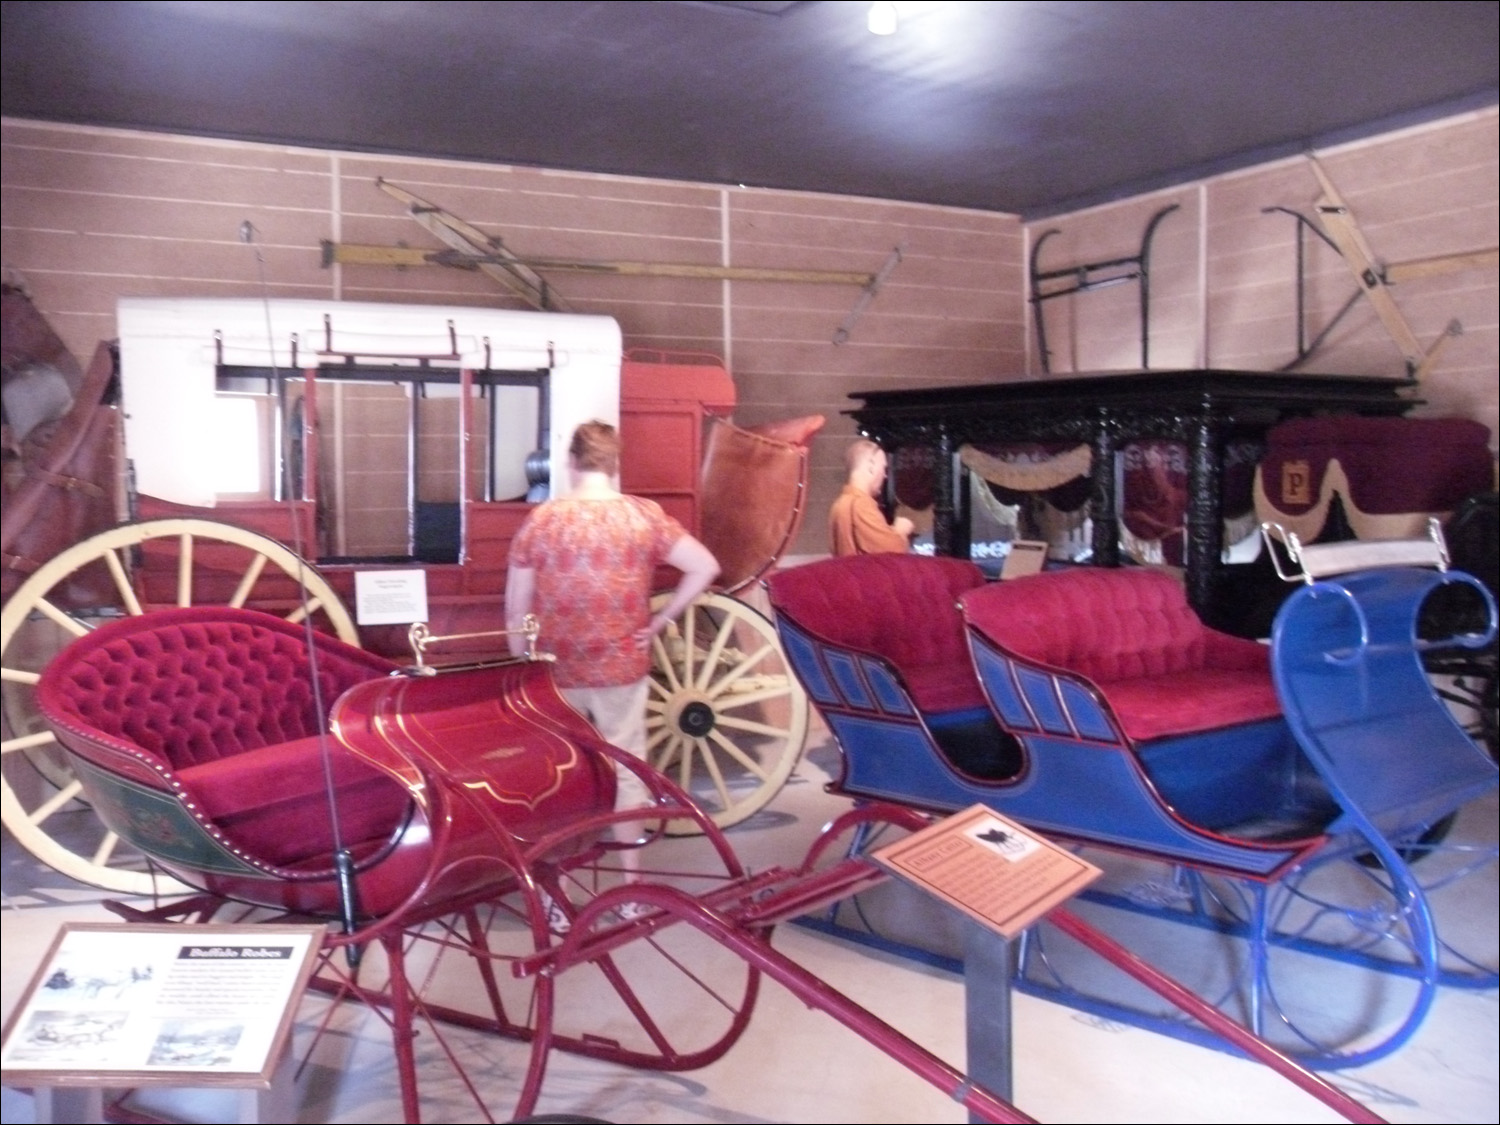 Fort Benton, MT Agriculture Museum-snow sleighs, carriage